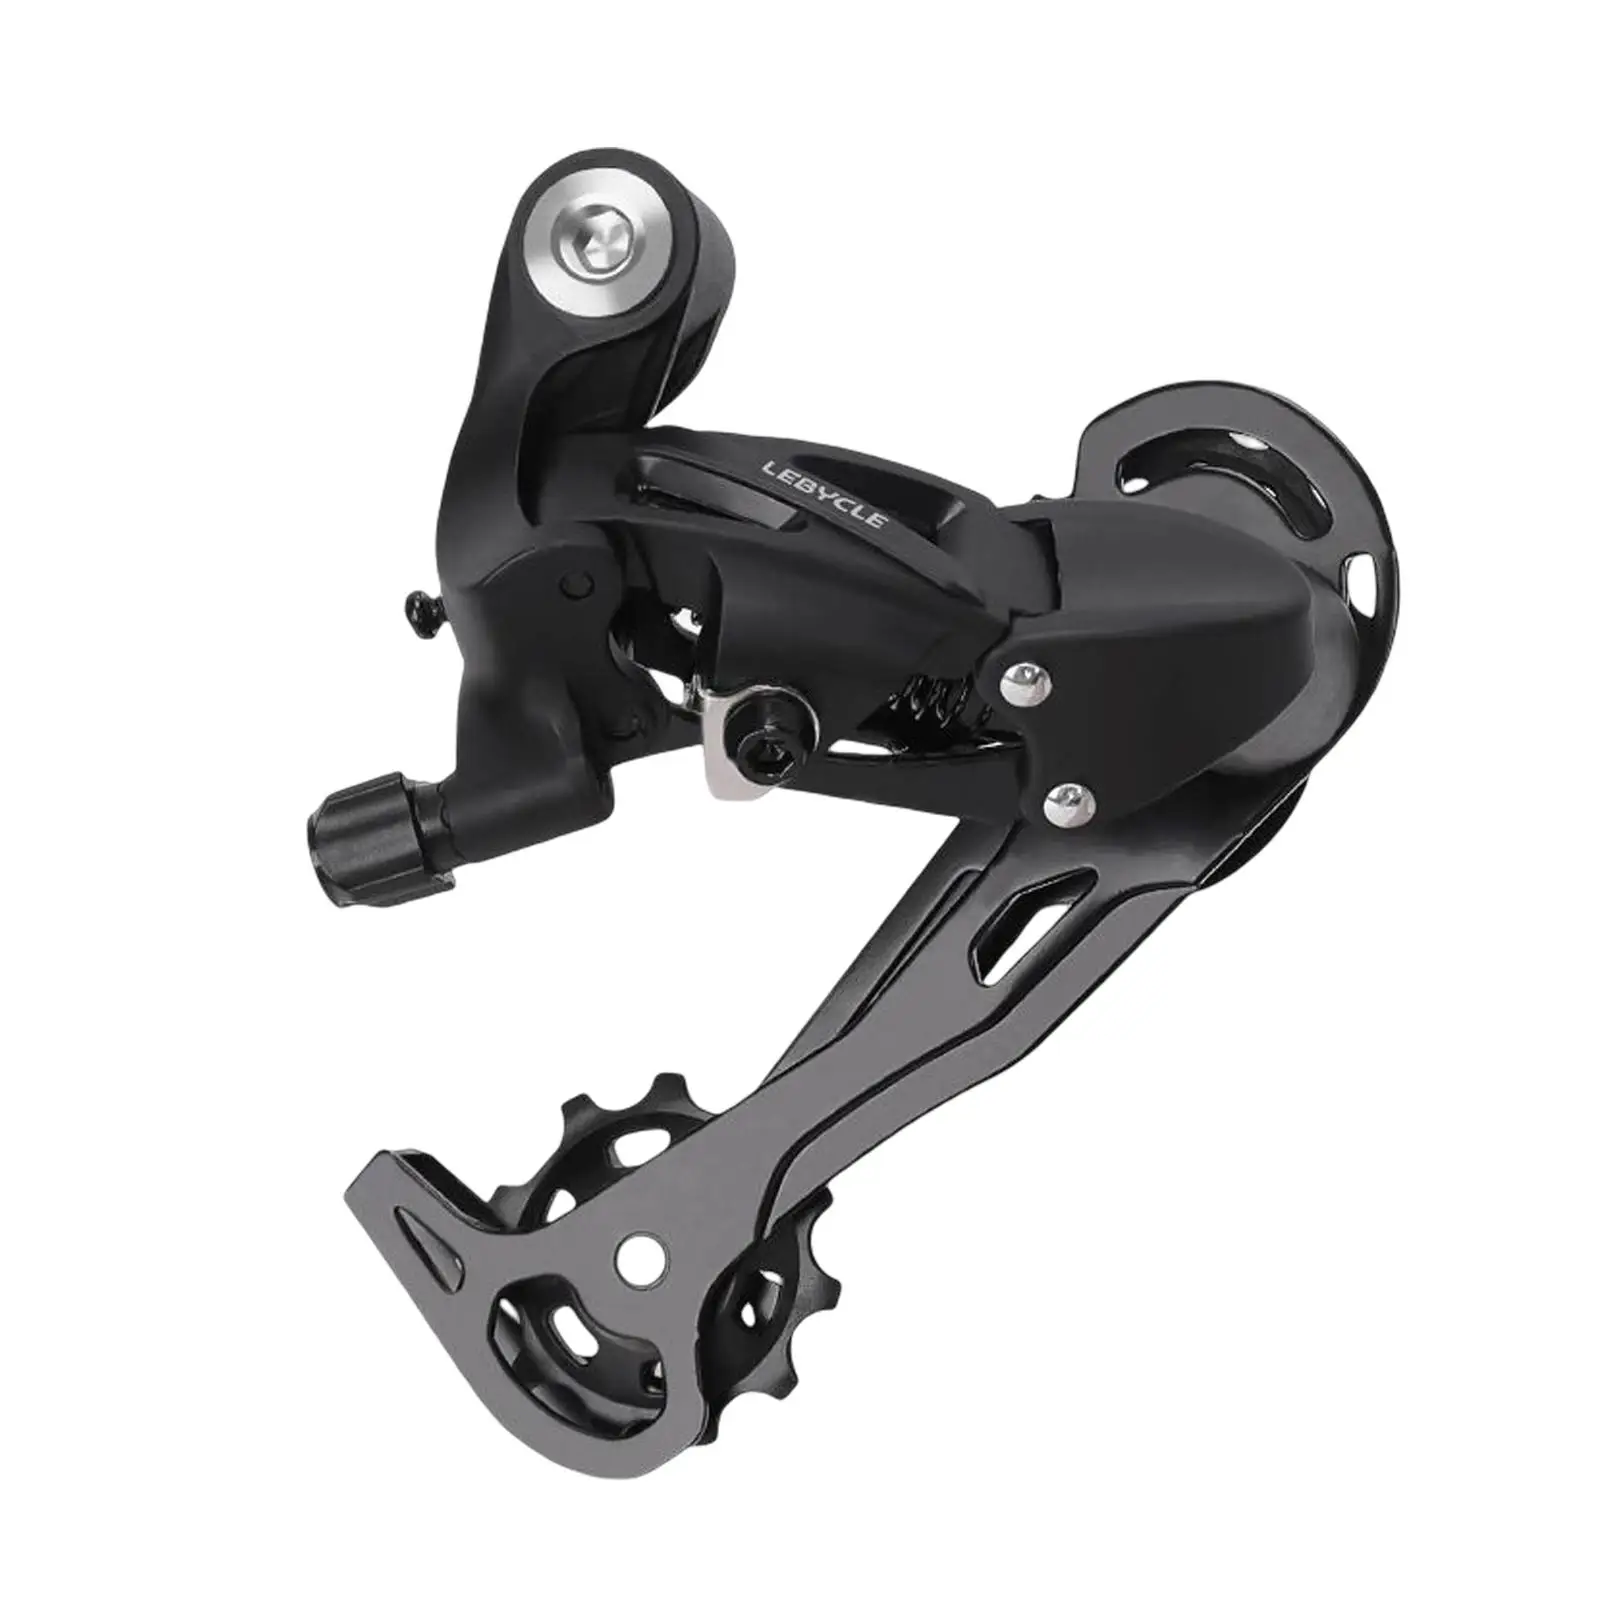 Rear Derailleur Chain Tension Adapter for Mountain Road Bike Cycling Parts Chain Support Transmission Wheel